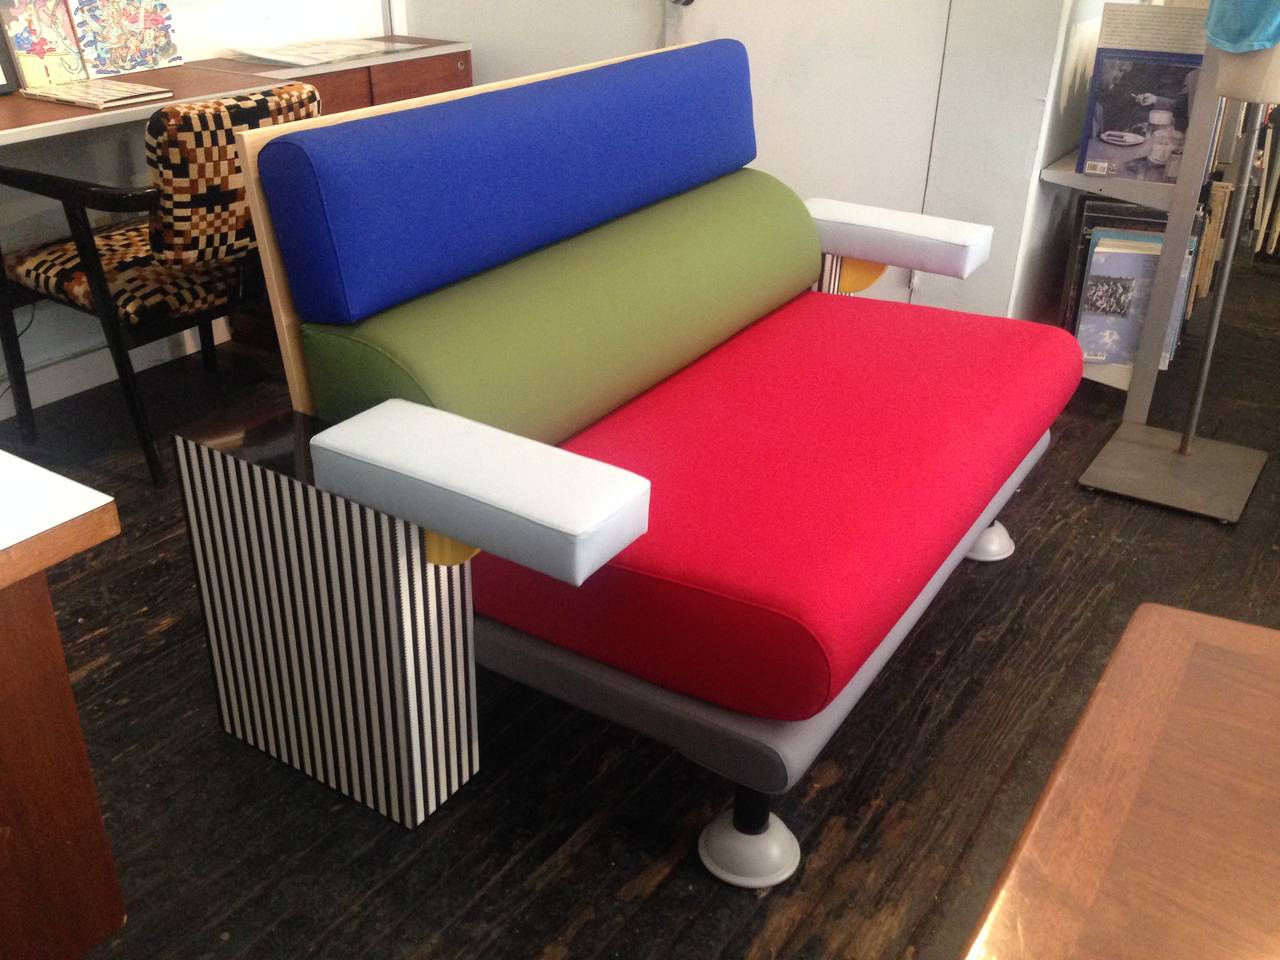 Lido settee by Michele De Lucchi for Memphis Milano1982.

wood, metal, wool, laminate